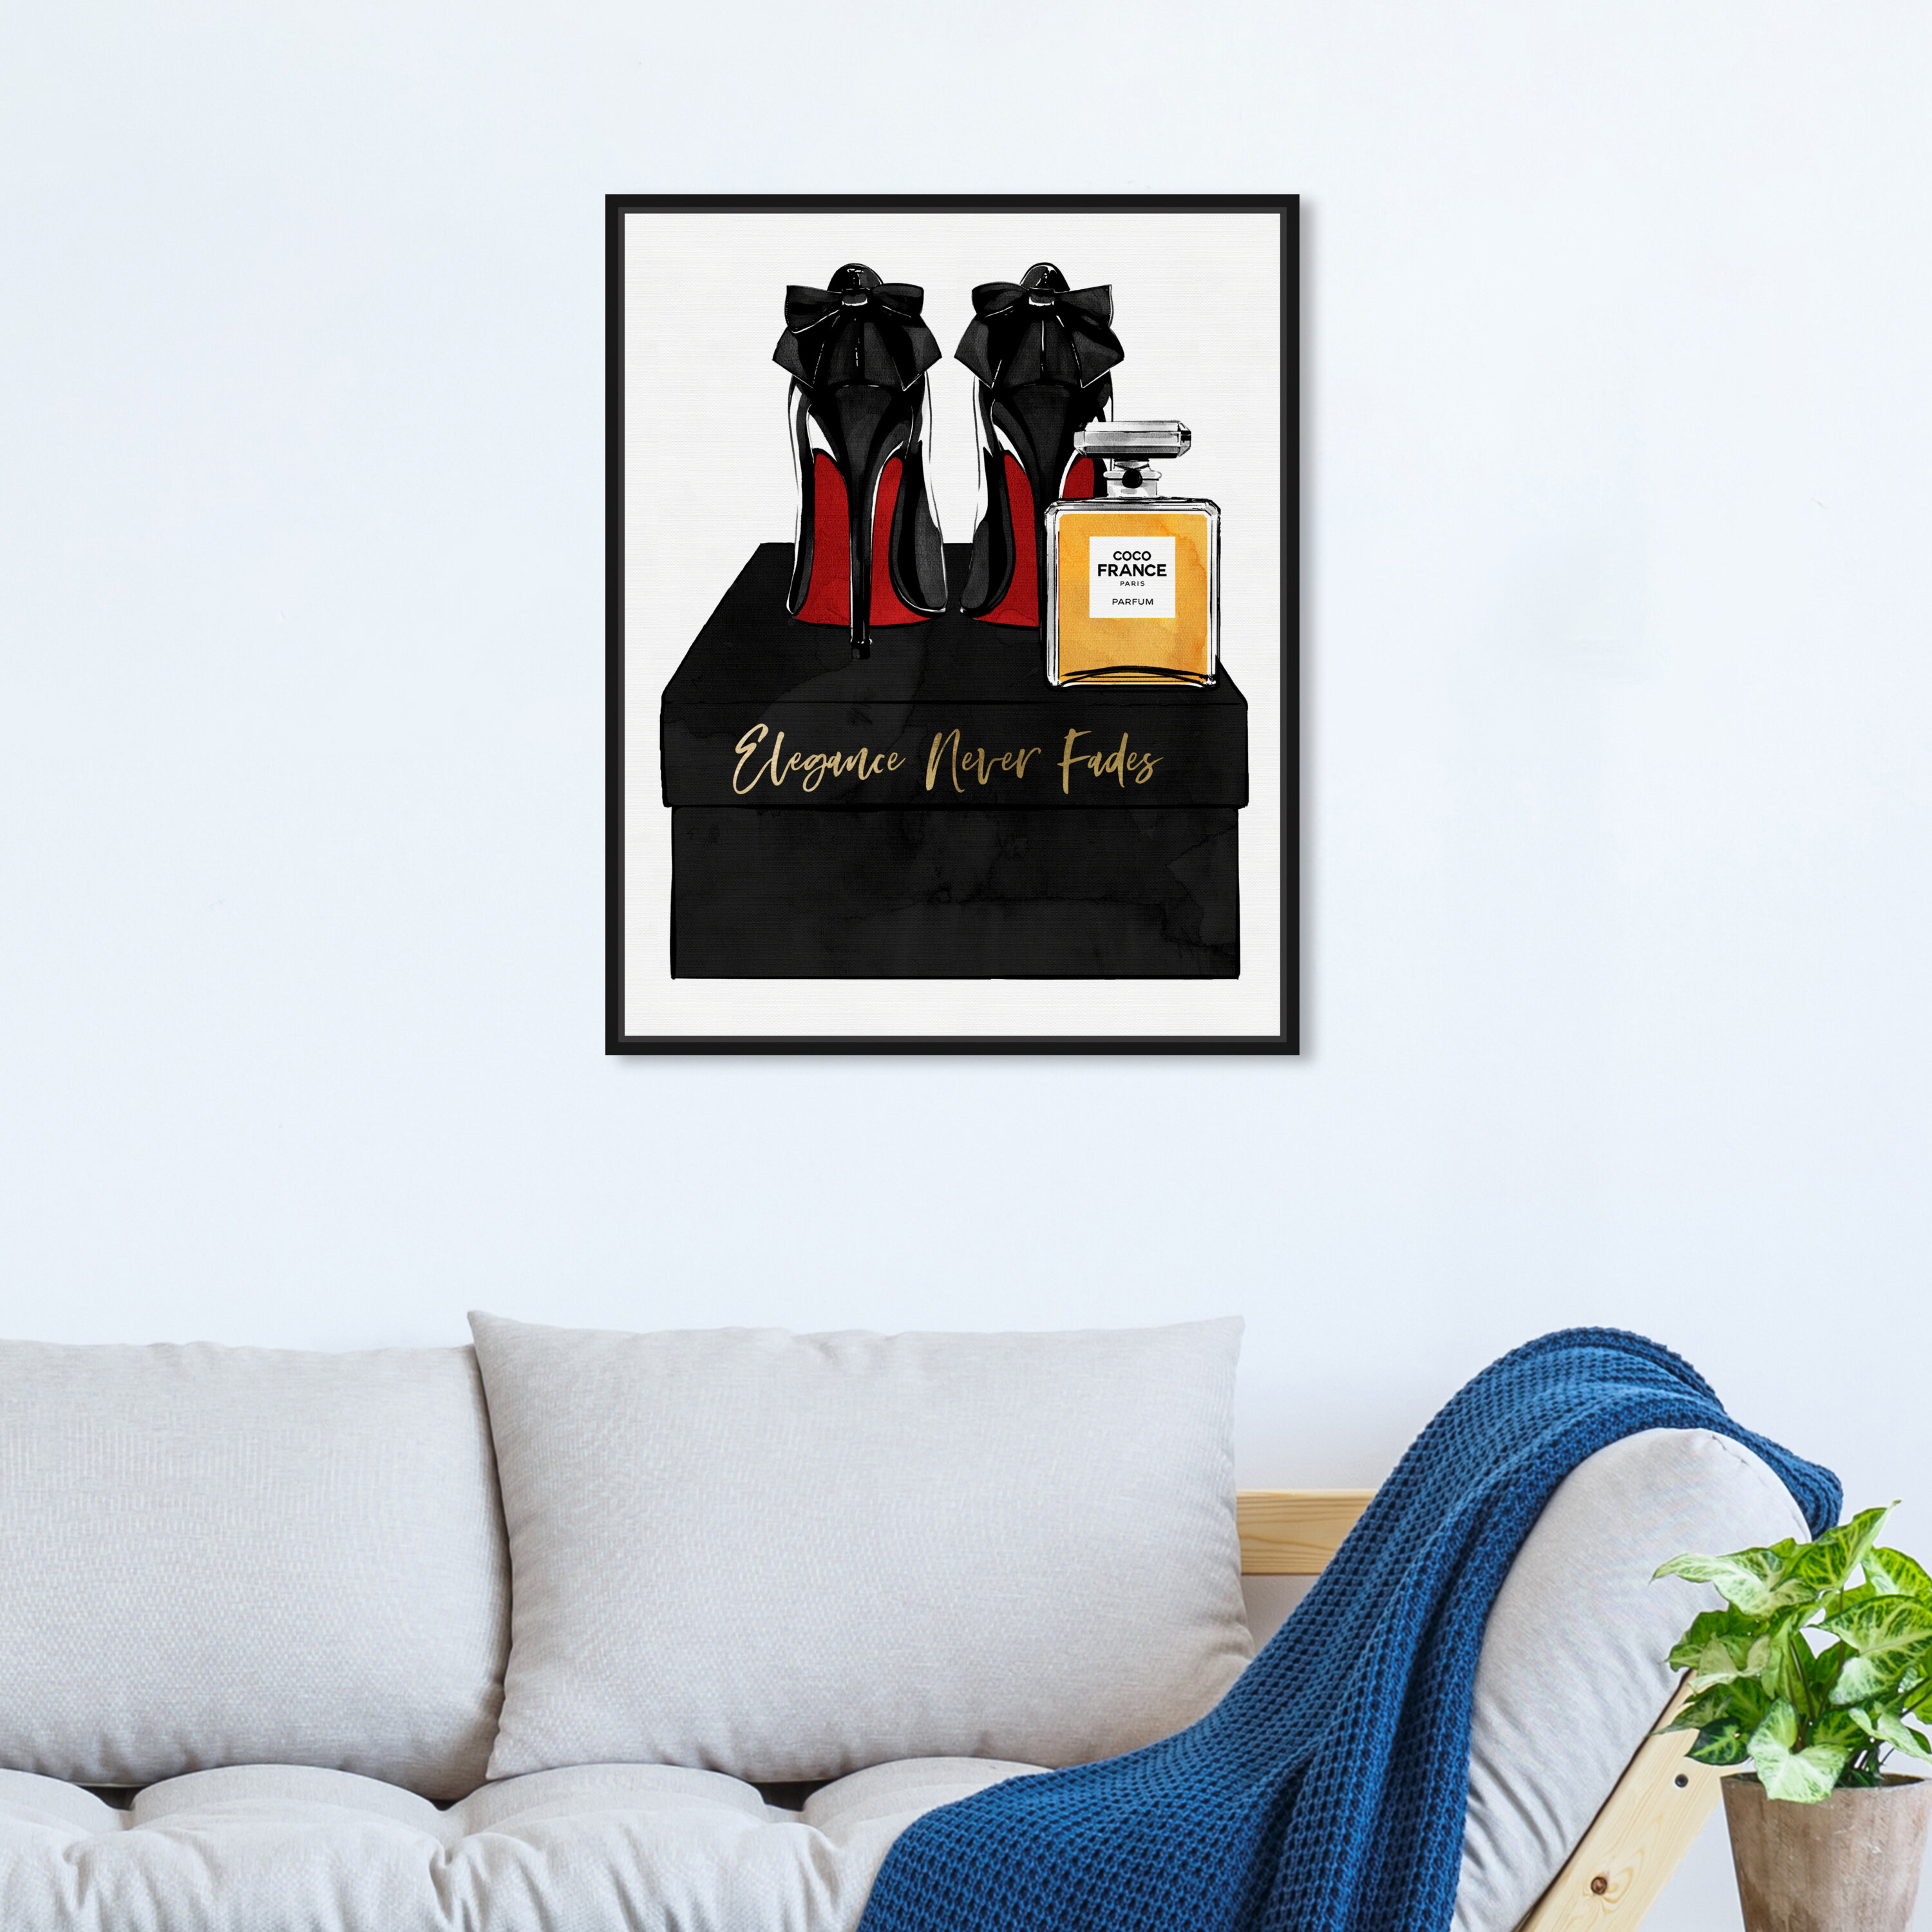 French Coffee by Gregory Gorham Fine Art Poster Print by Gregory Gorham (16  x 20) 